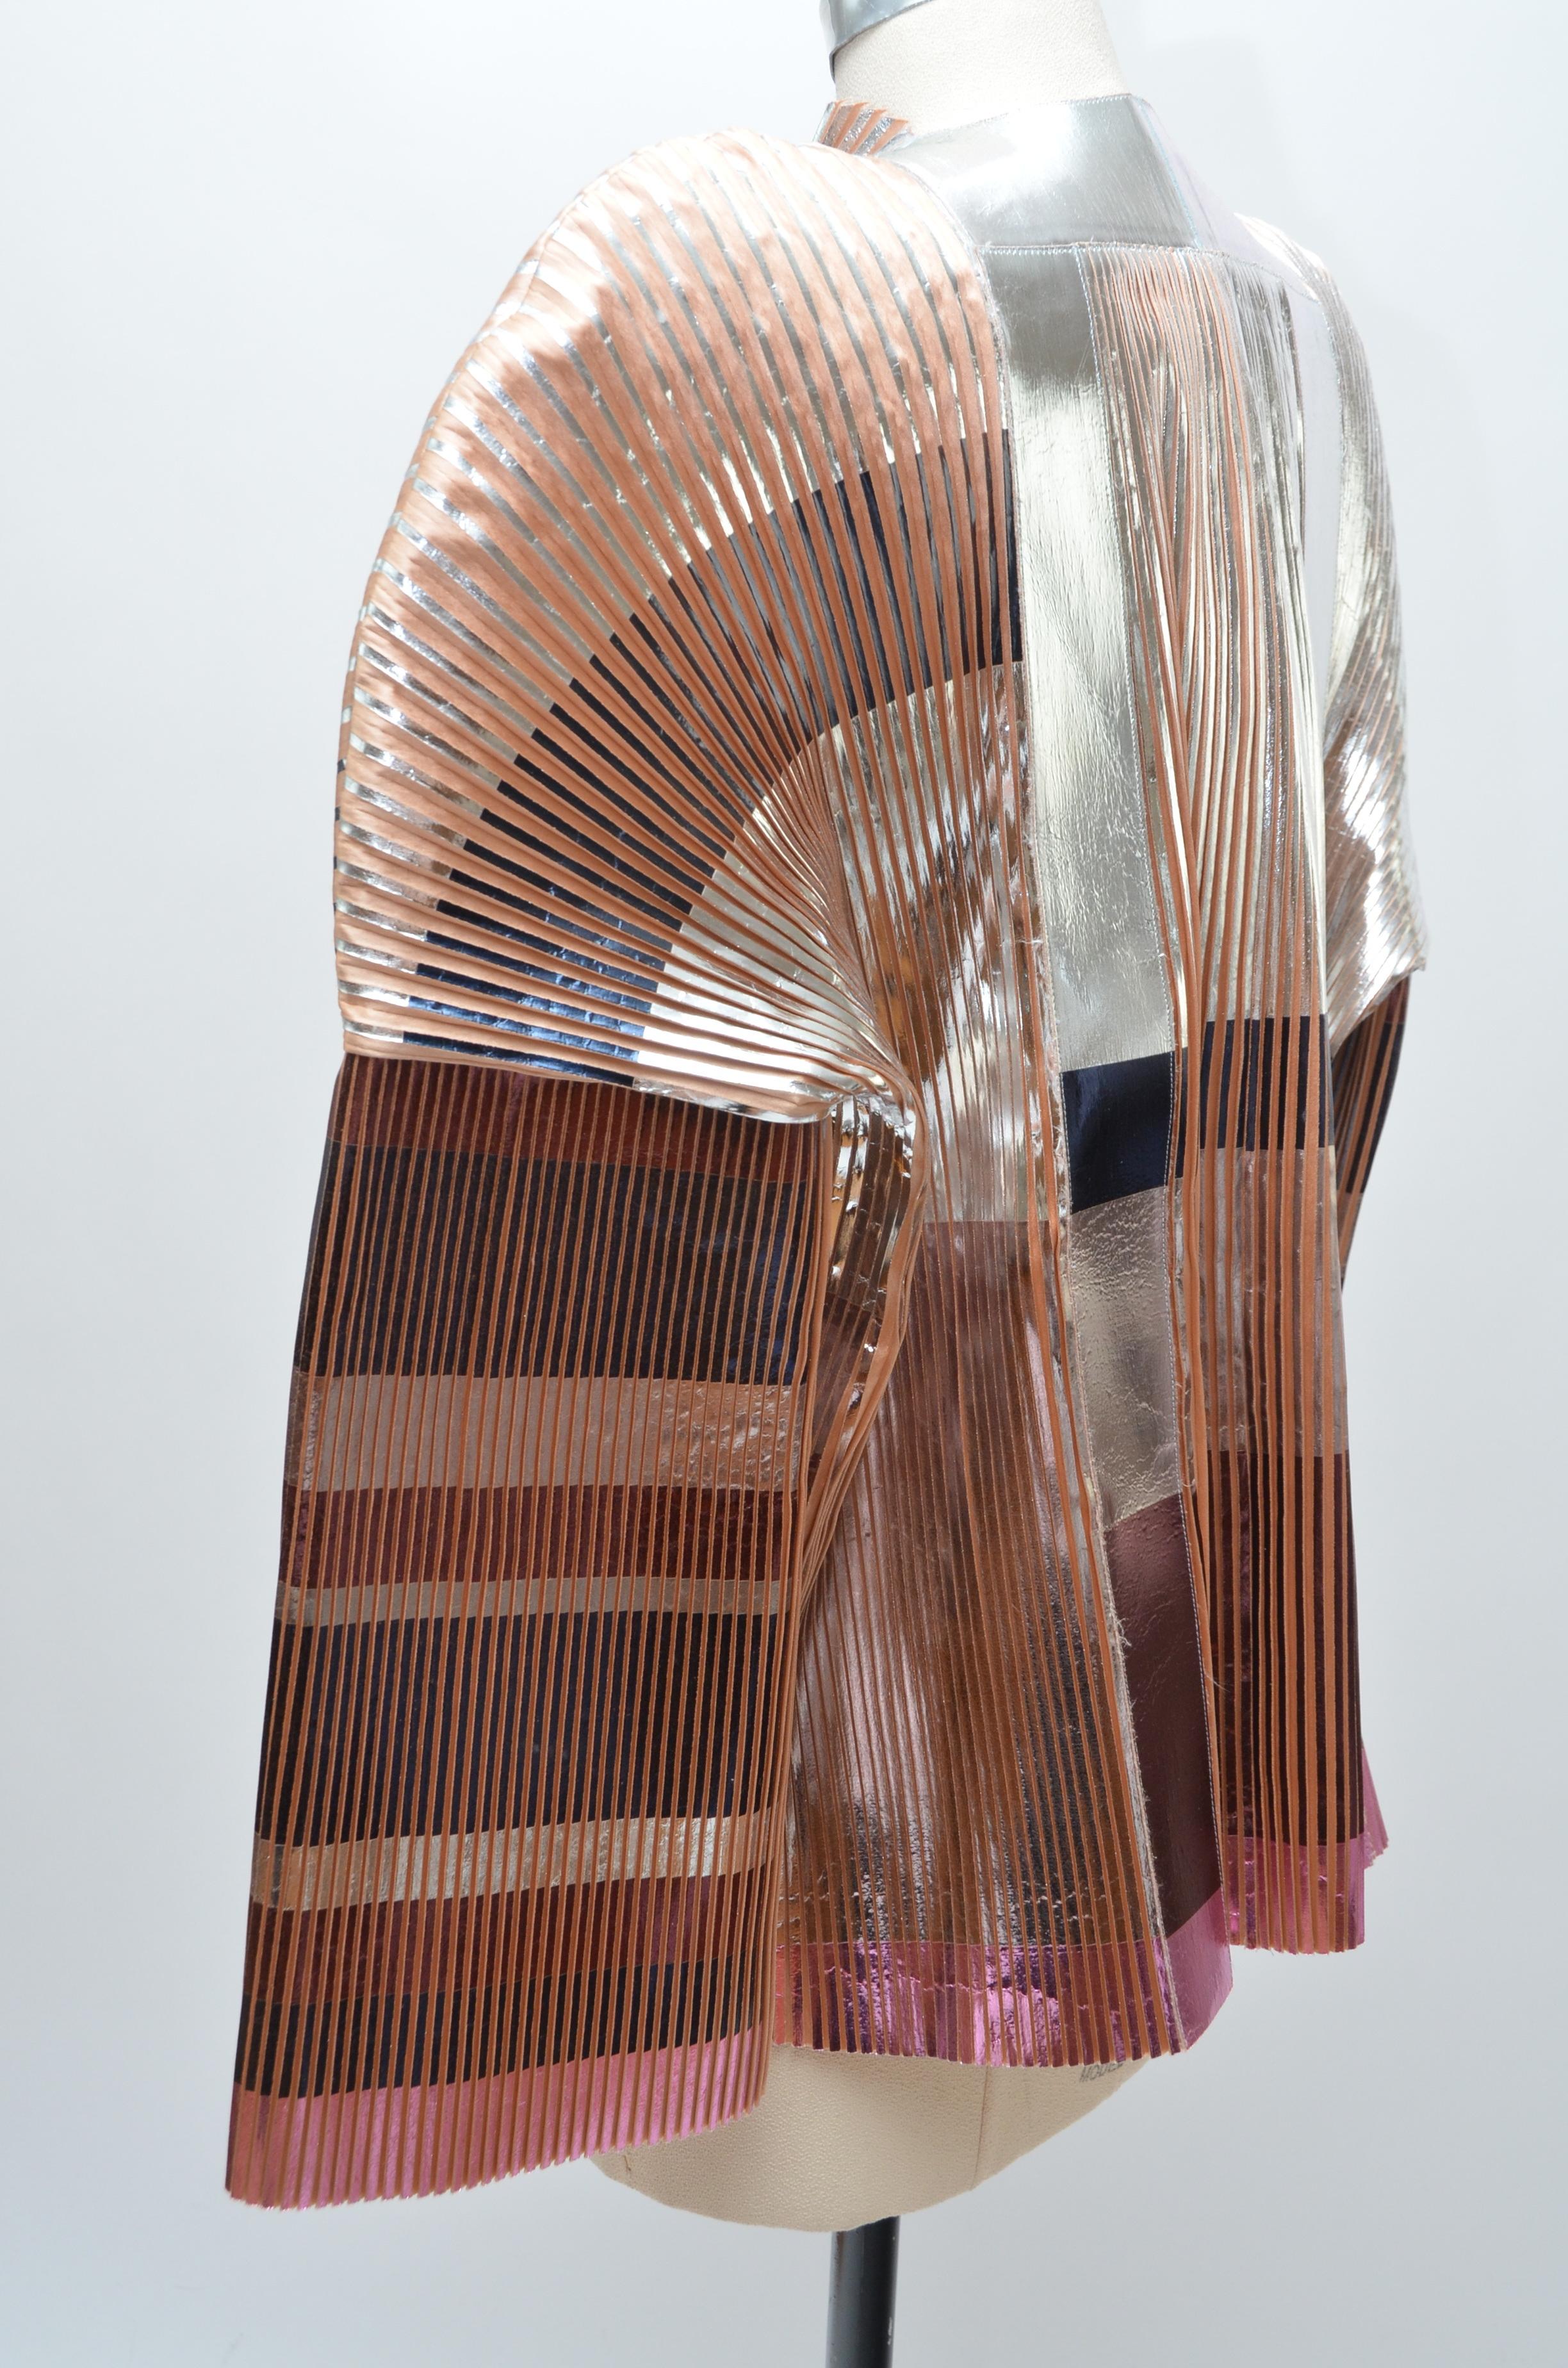 Balenciaga By Nicolas Ghesquiere  Tissue-Fine Metallic Pleated Jacket, 2008 In New Condition In New York, NY